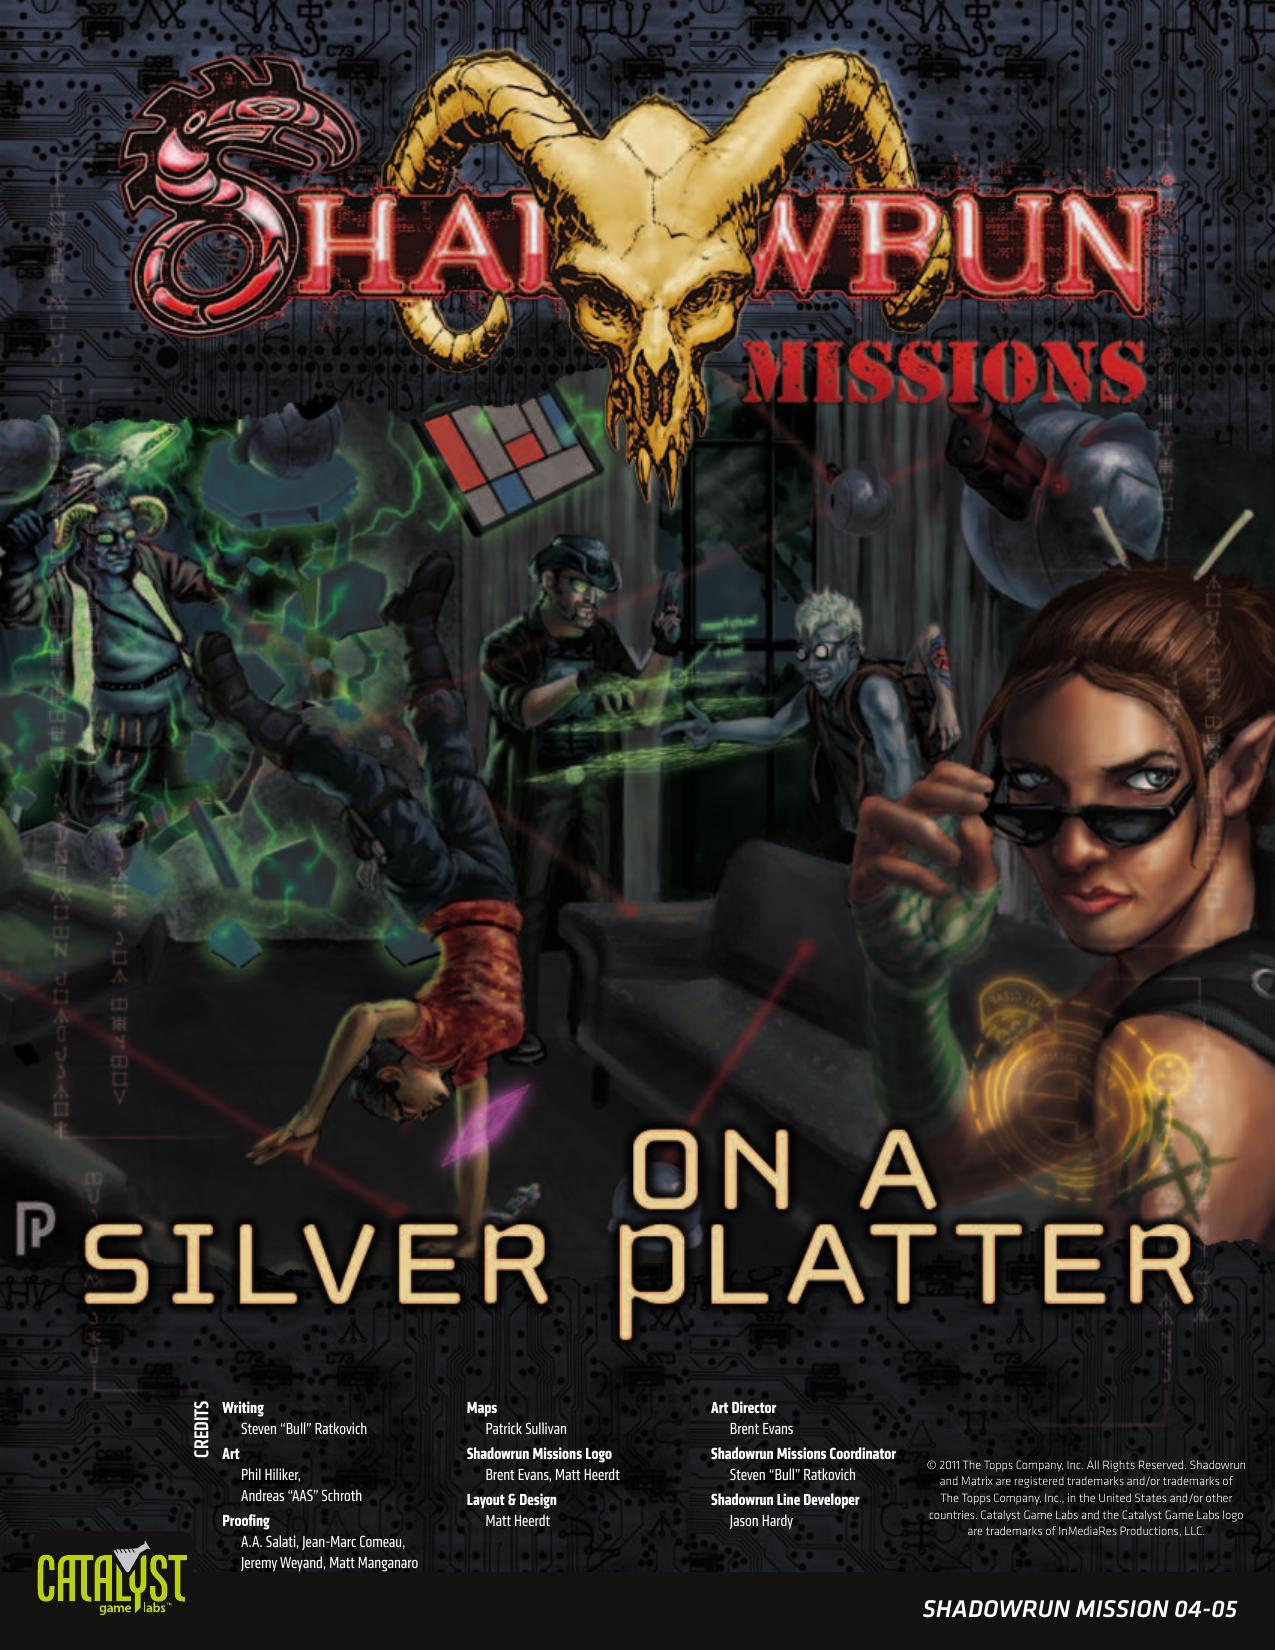 Shadowrun Missions: On a Silver Platter (0405)